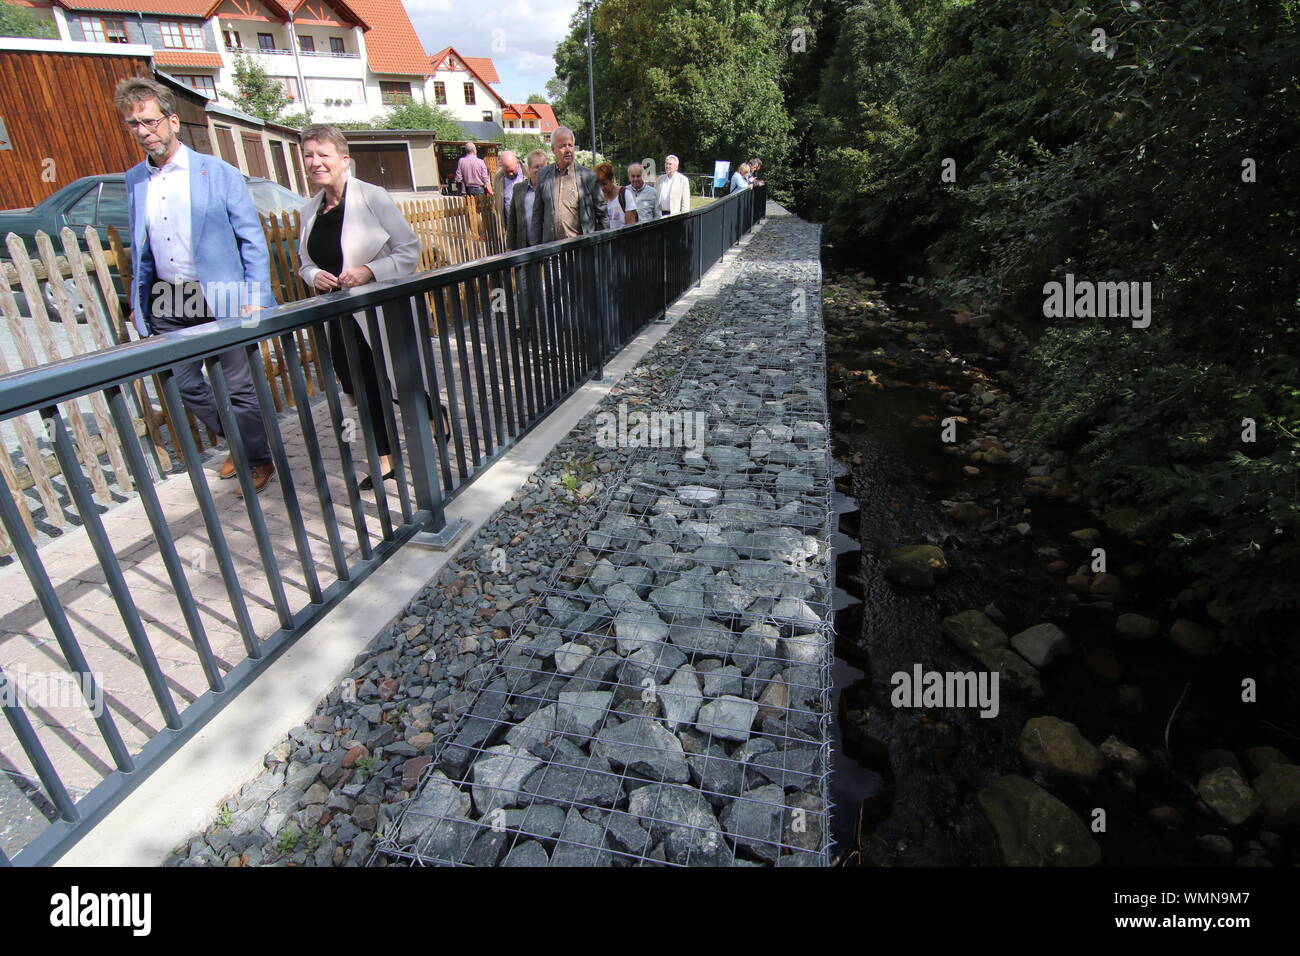 05 September 2019, Saxony-Anhalt, Ilsenburg: Representatives of the Ministry of the Environment of Saxony-Anhalt, the city of Ilsenburg as well as involved construction companies met to visit the bank wall at the Ilse after restoration in the course of the removal of flood damages. In the year 2017 the bank wall at the Ilse collapsed in the course of the flood. Photo: Matthias Bein/dpa-Zentralbild/ZB Stock Photo